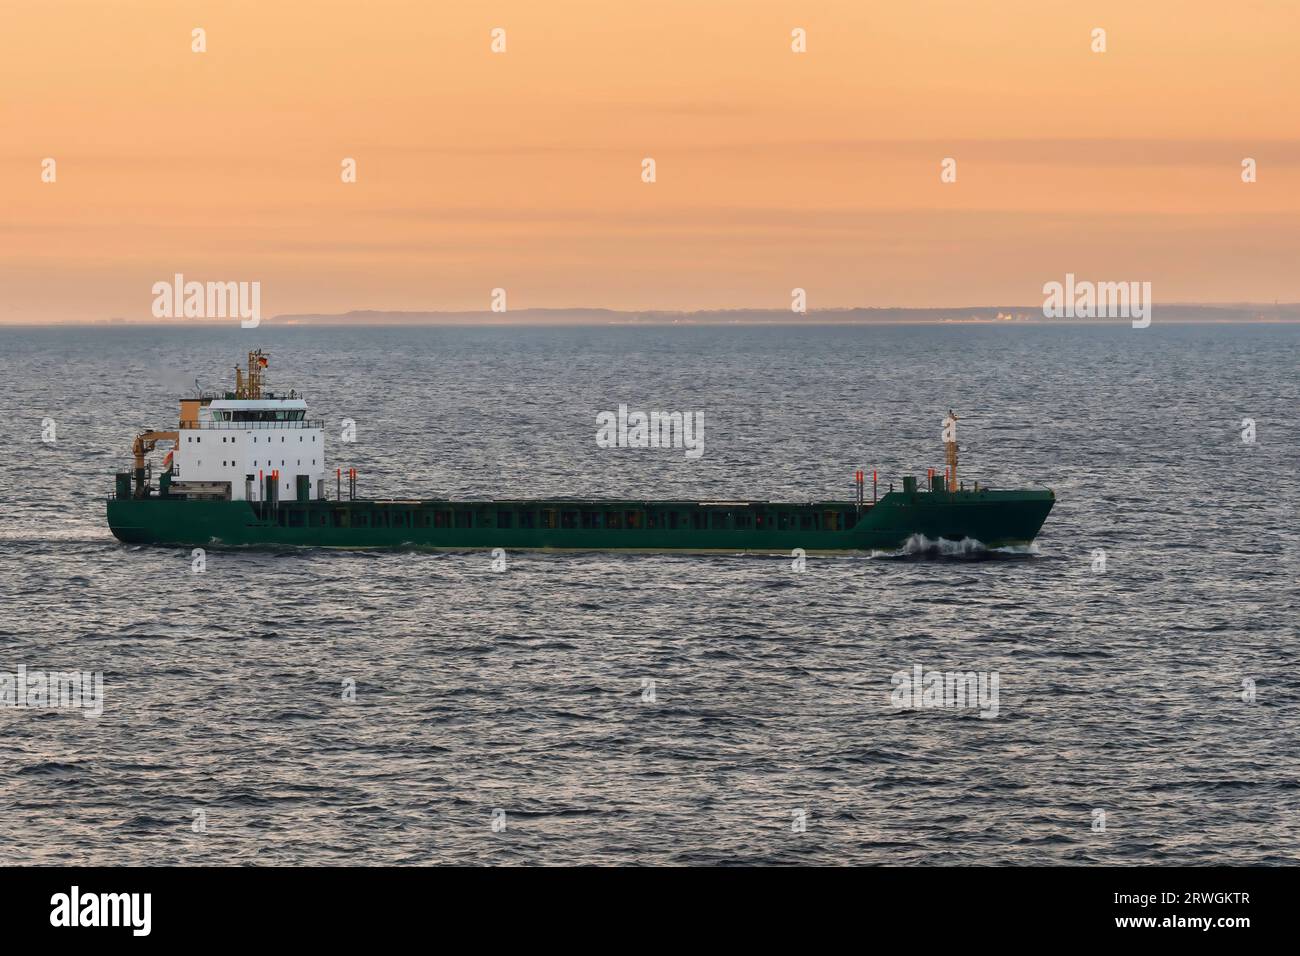 A small bulk carrier underway at sea Stock Photo